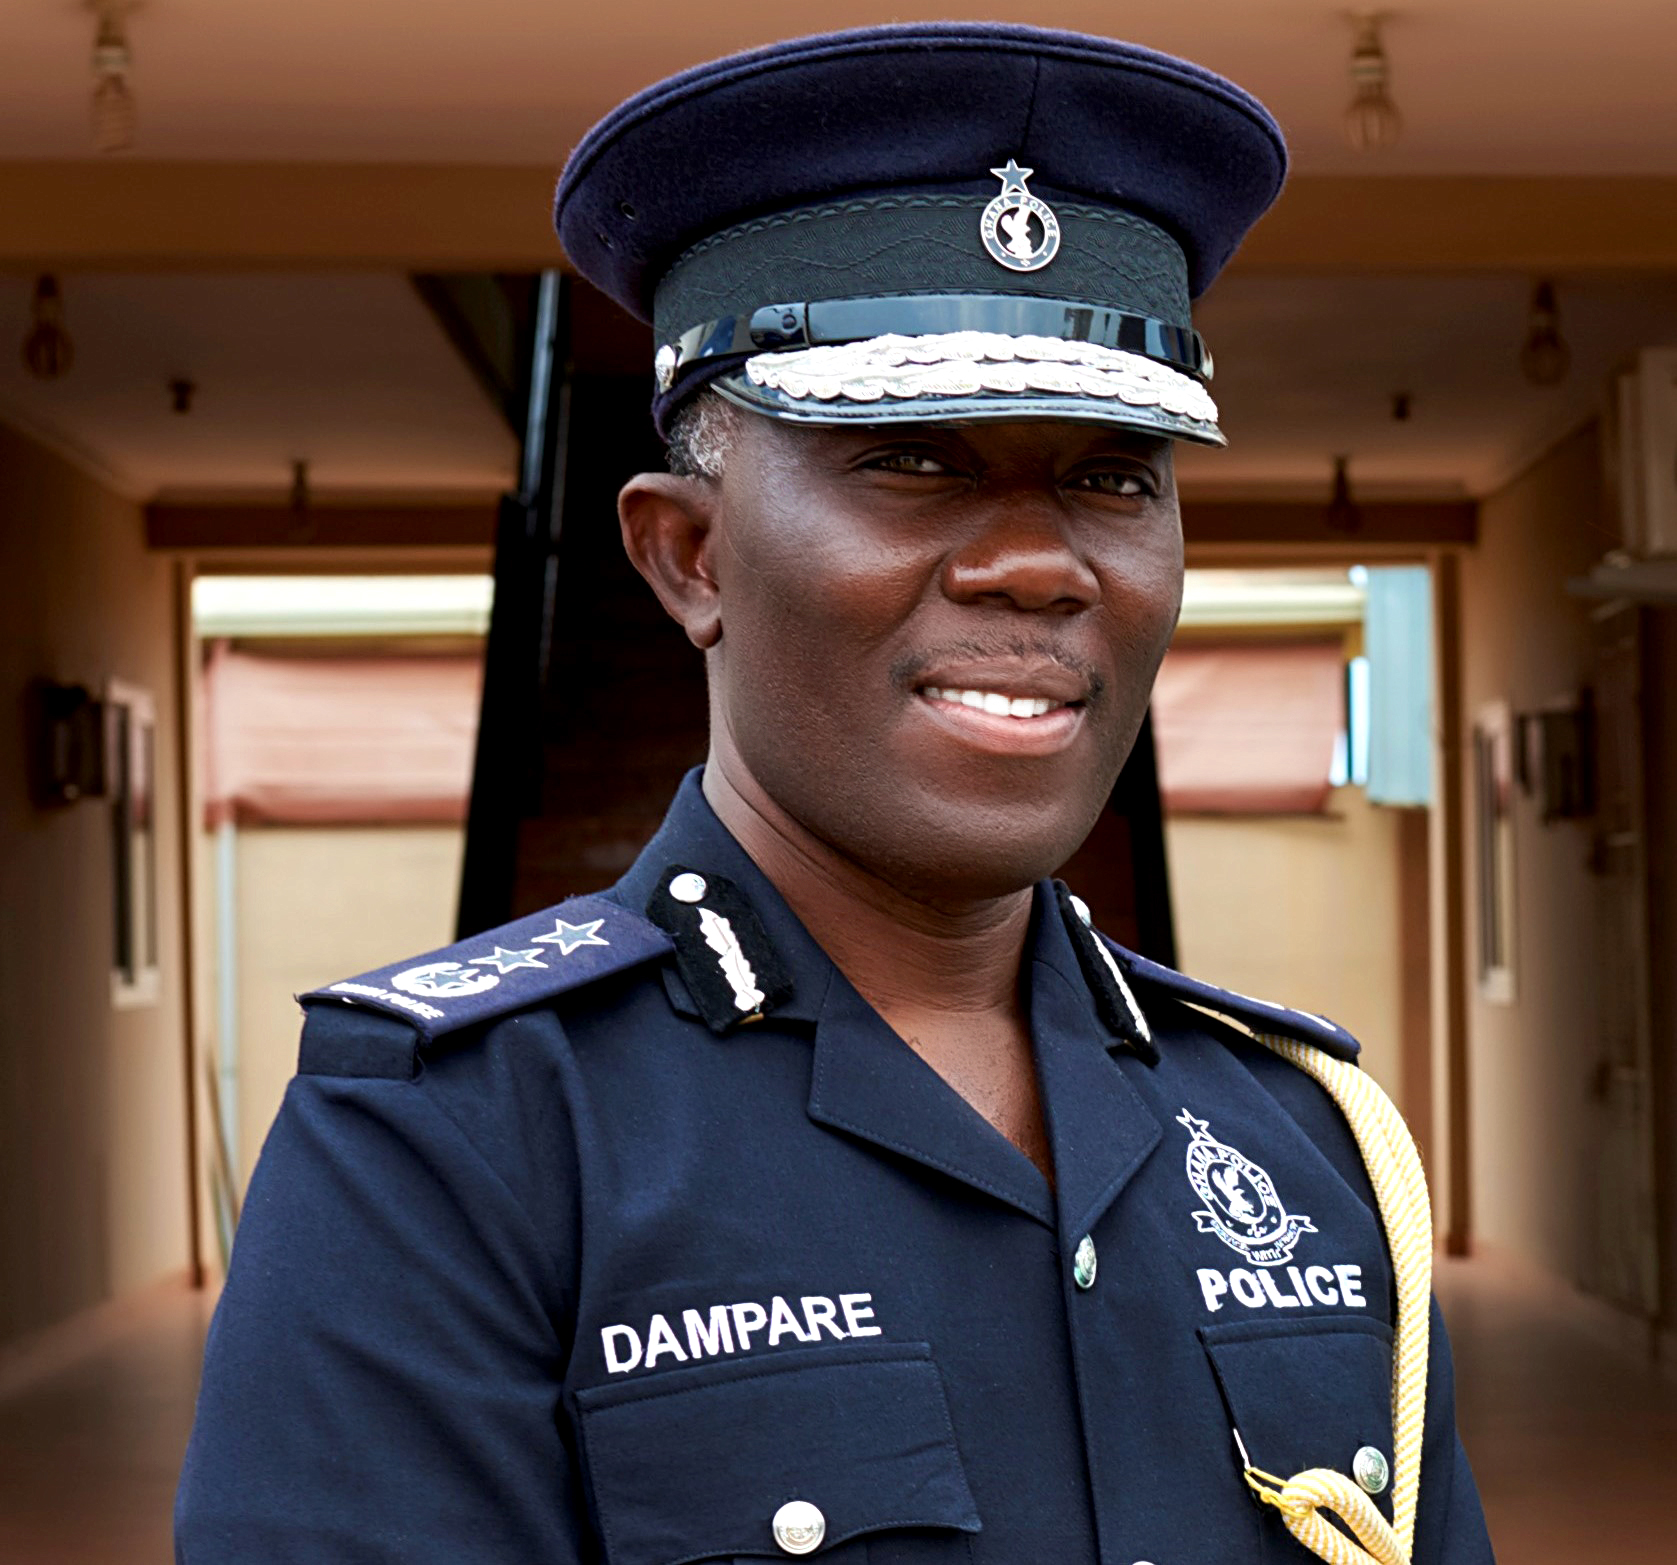 COP Dr. Akuffo Dampare is the right man for IGP job- Prof. Aning